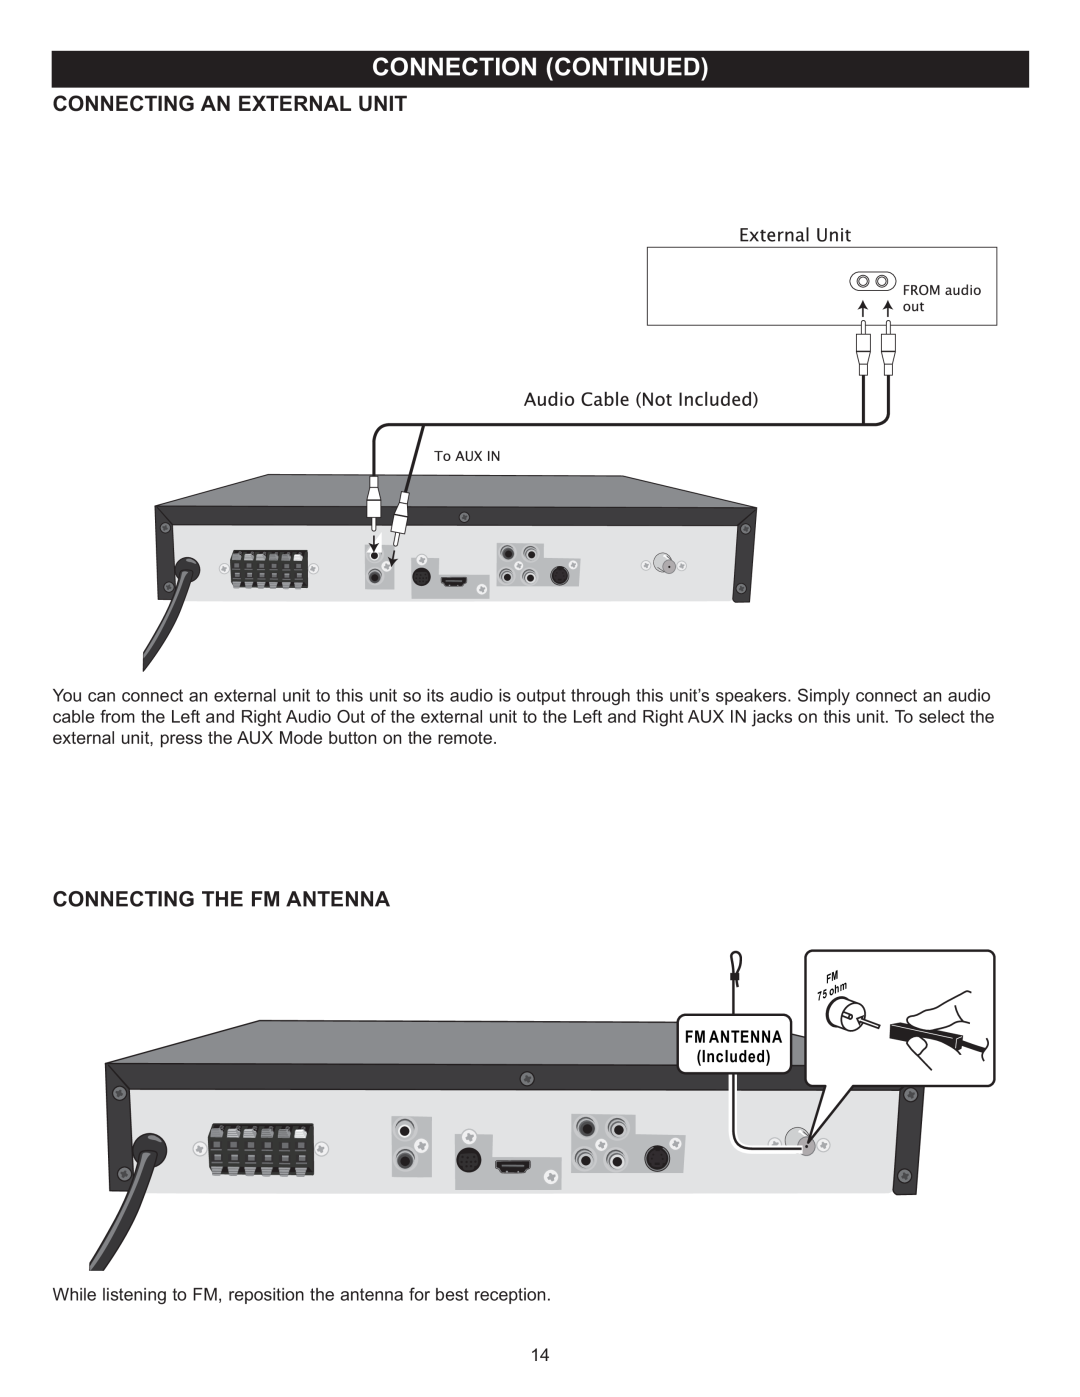 Memorex MIHT5005 manual Connecting An External Unit, Connecting The Fm Antenna, FM ANTENNA Included 